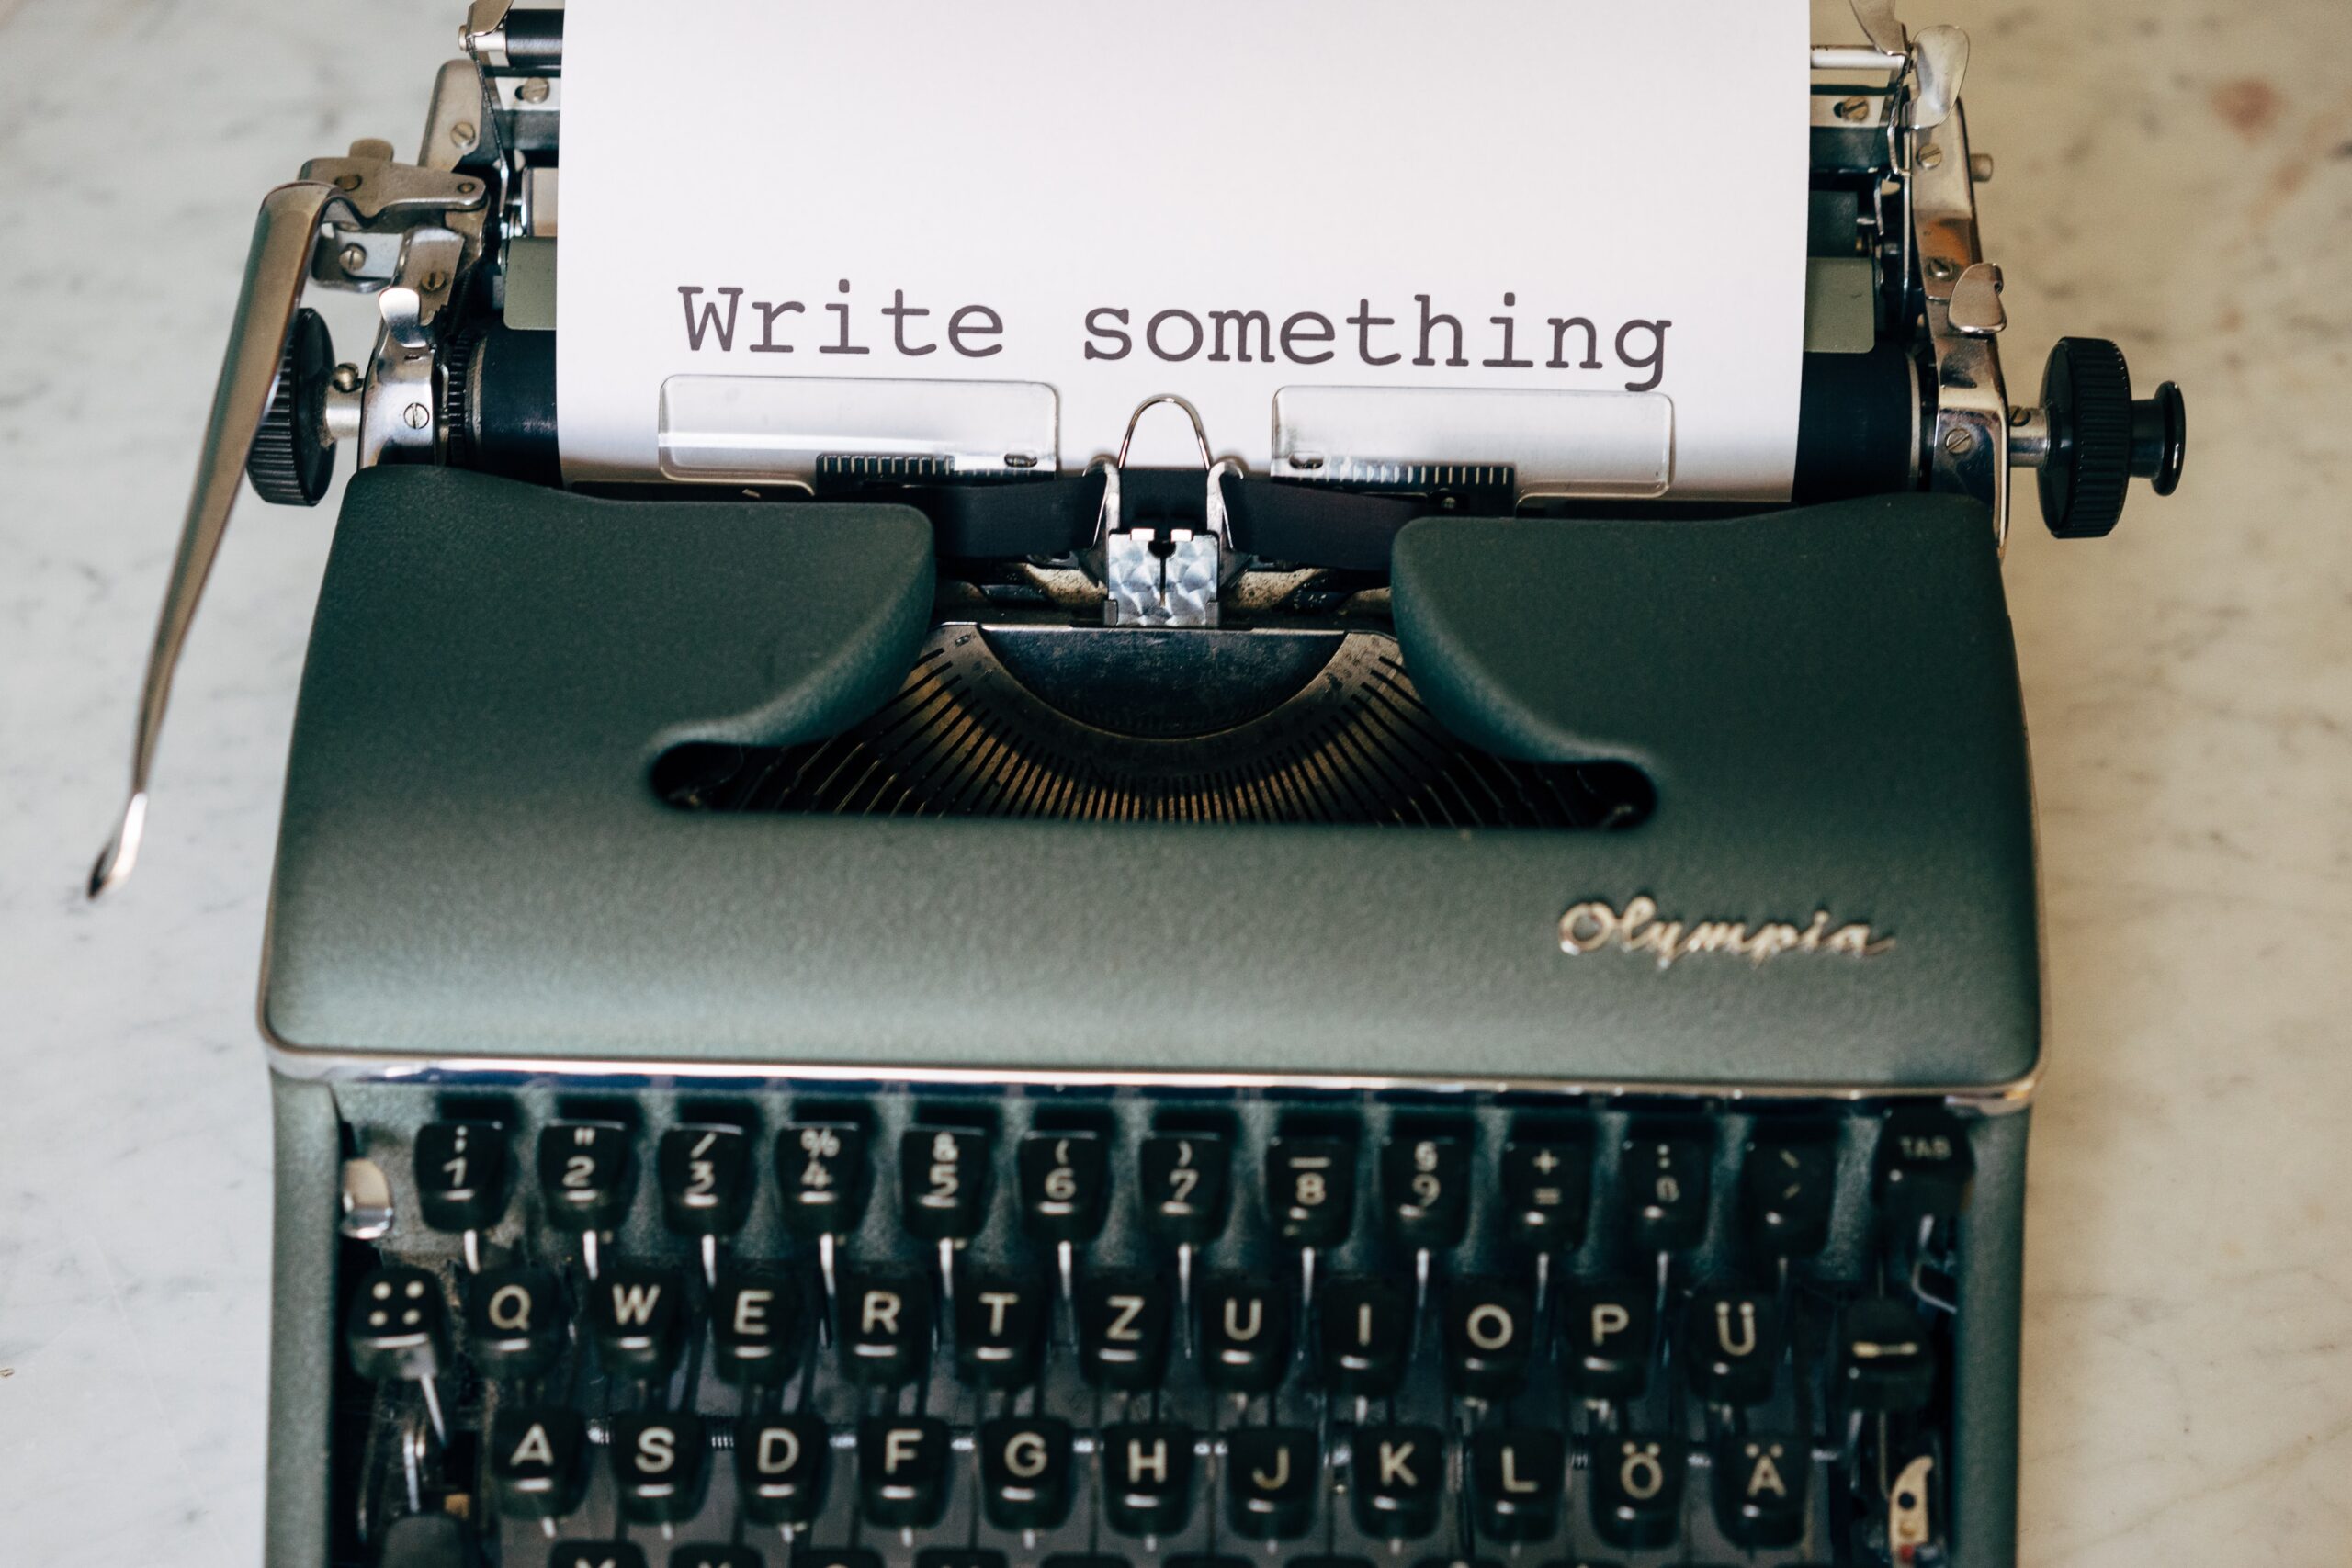 A photograpjh of a dark grey type writer on a marble surface. The words write something are displayed on the paper in the typewriter